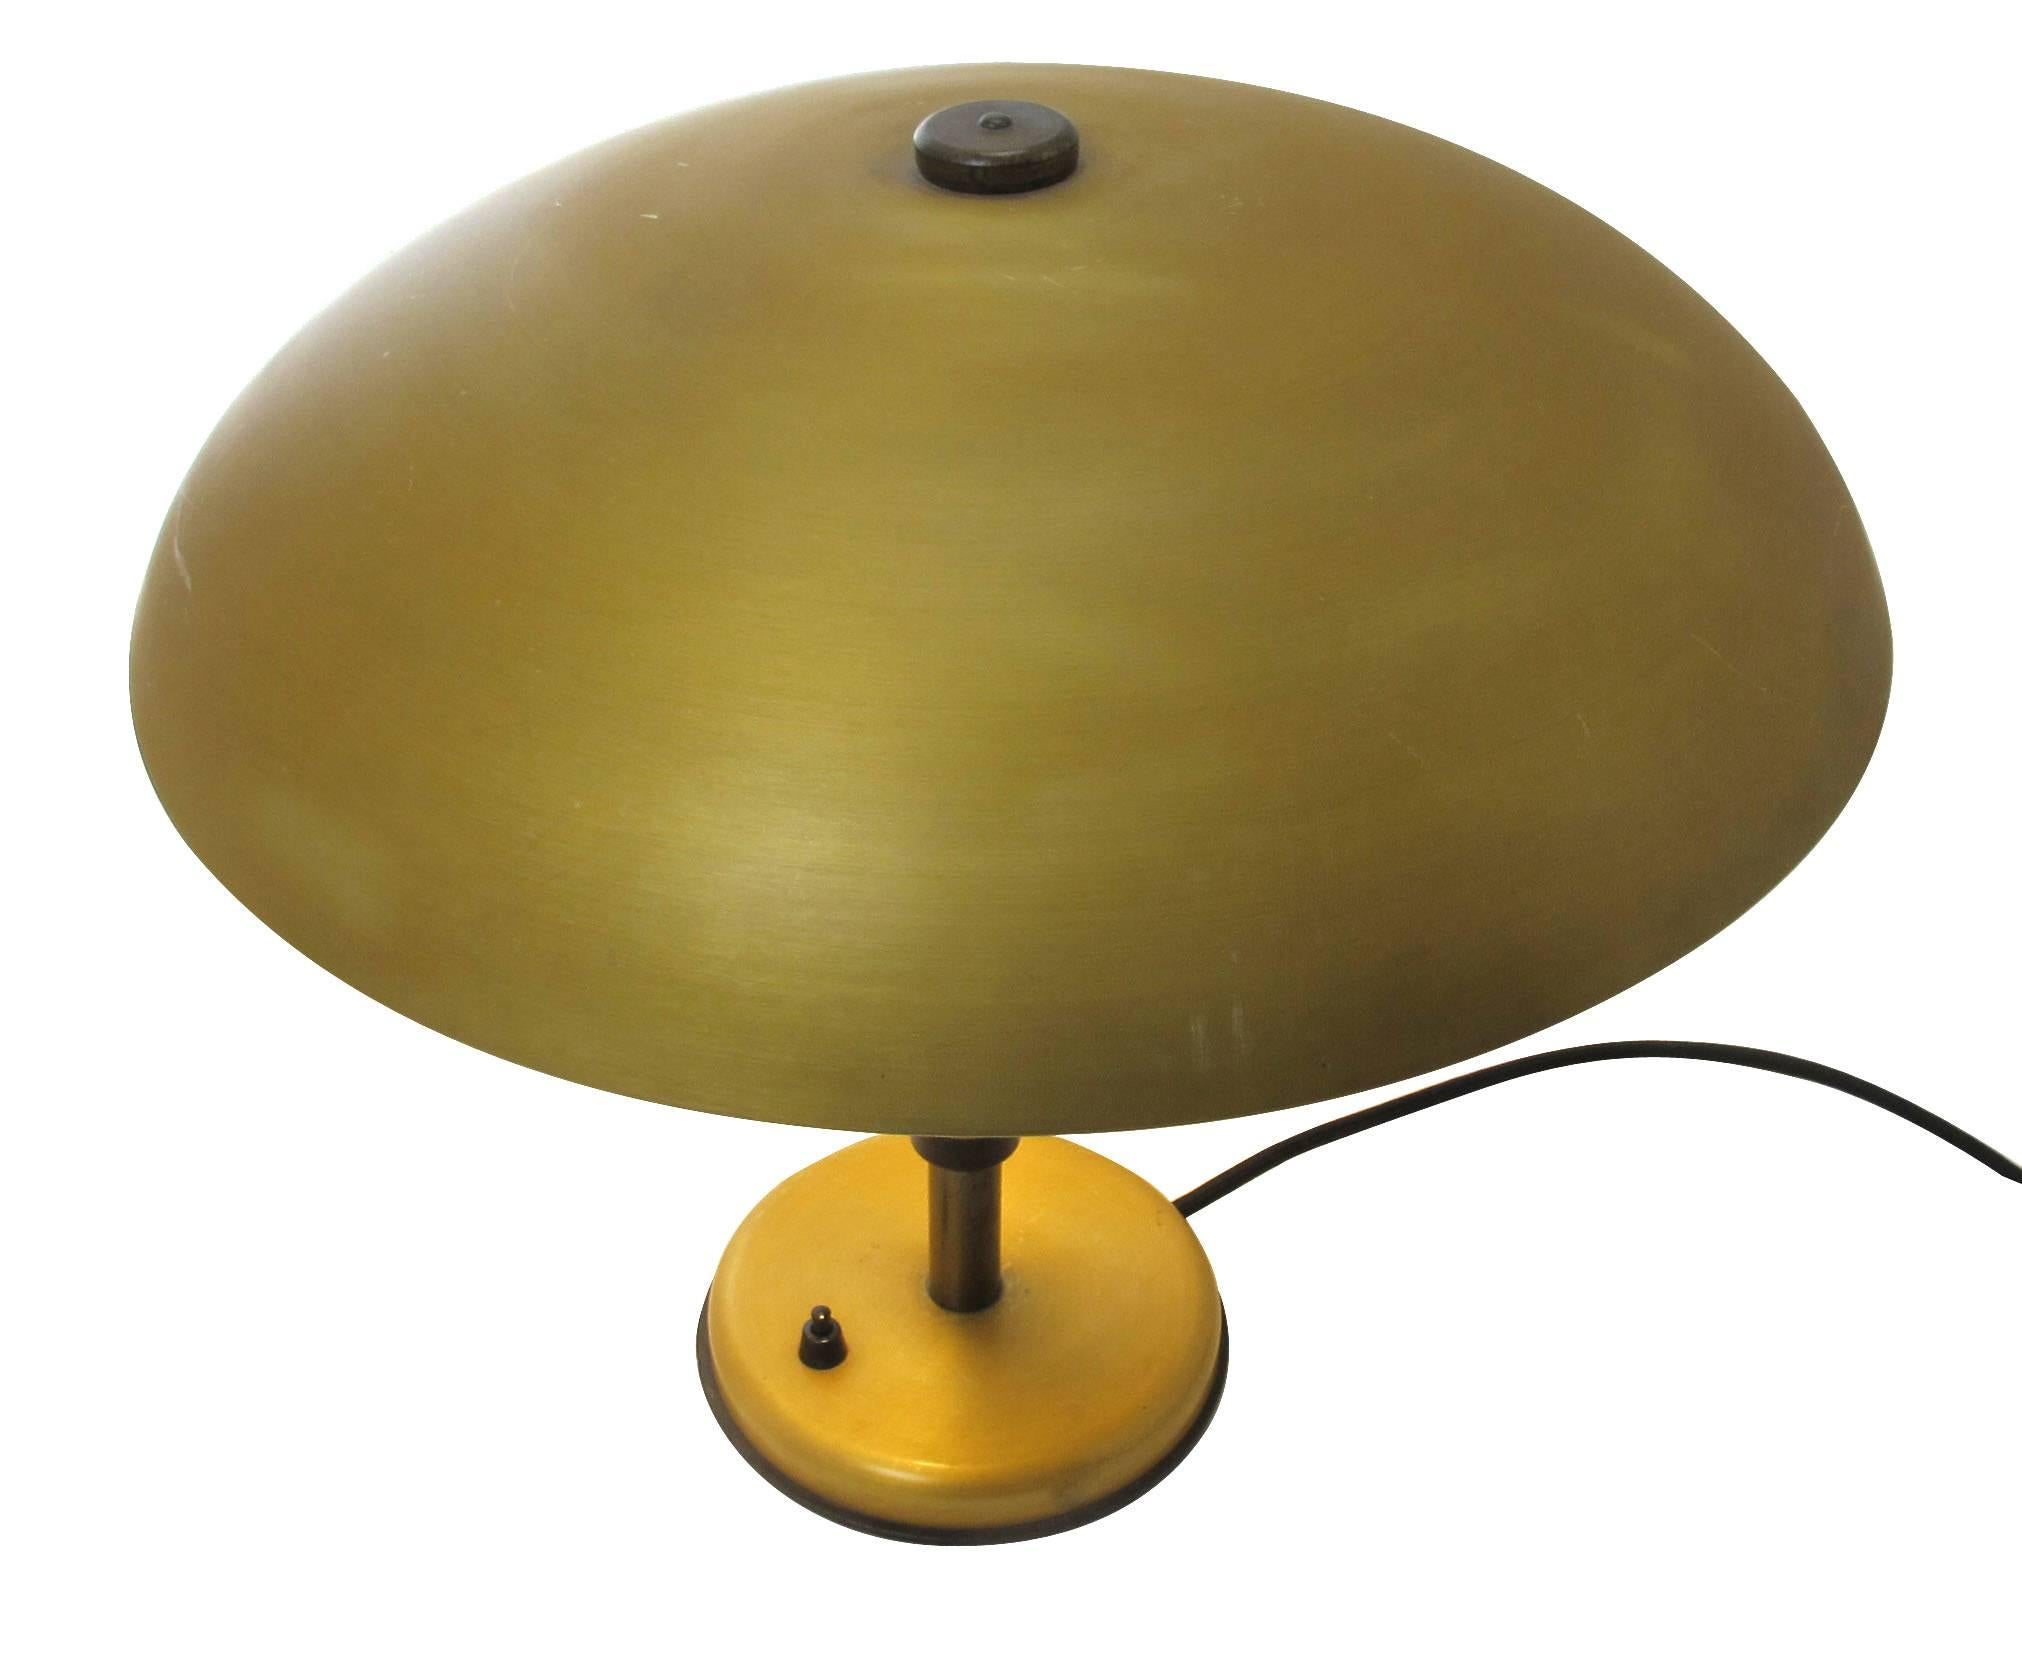  German Art Deco Table Lamp by SbF, 1944 For Sale 4